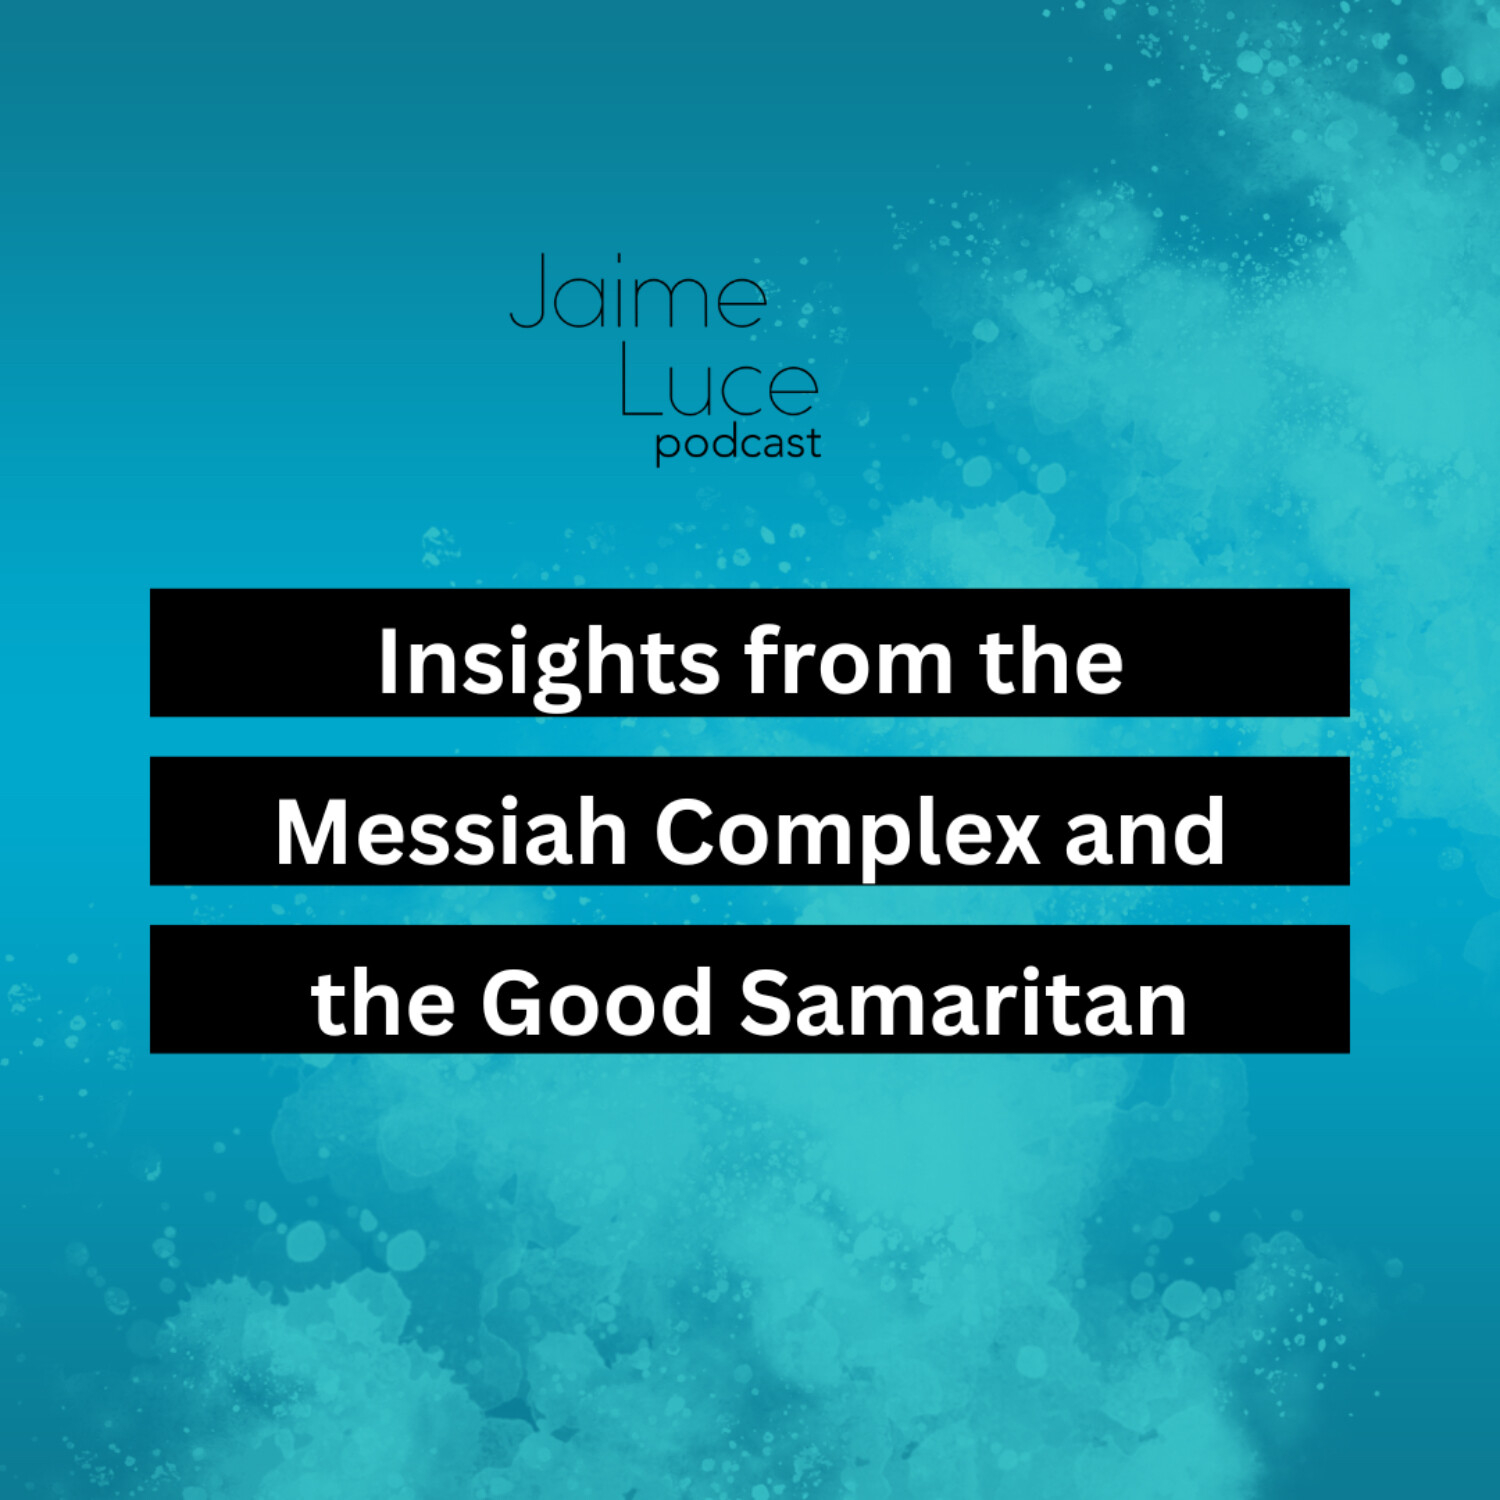 Insights from the Messiah Complex and the Good Samaritan